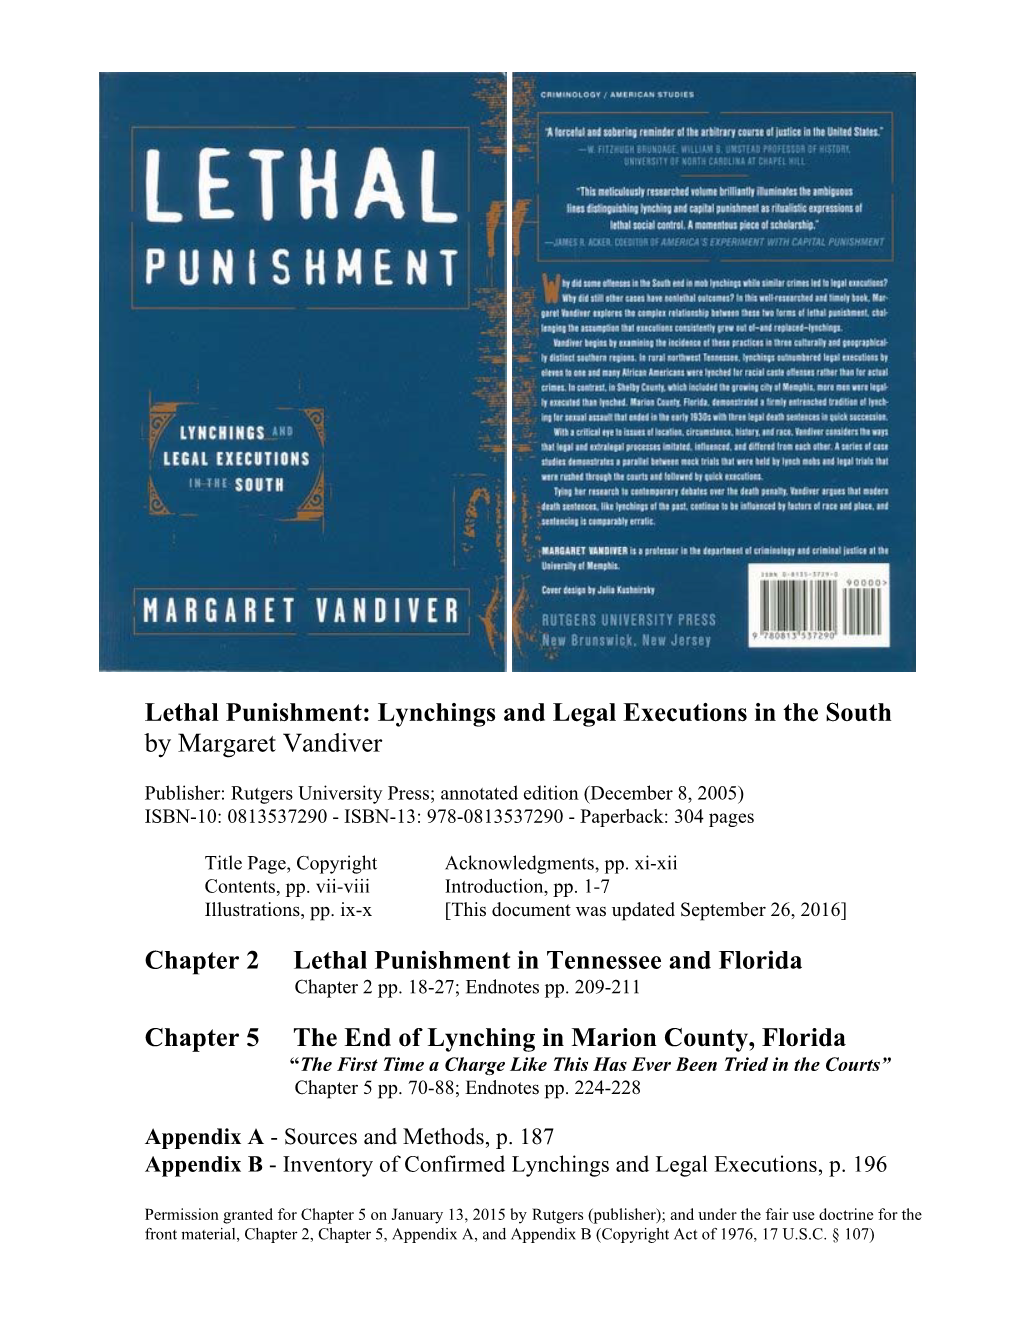 Lethal Punishment: Lynchings and Legal Executions in the South by Margaret Vandiver